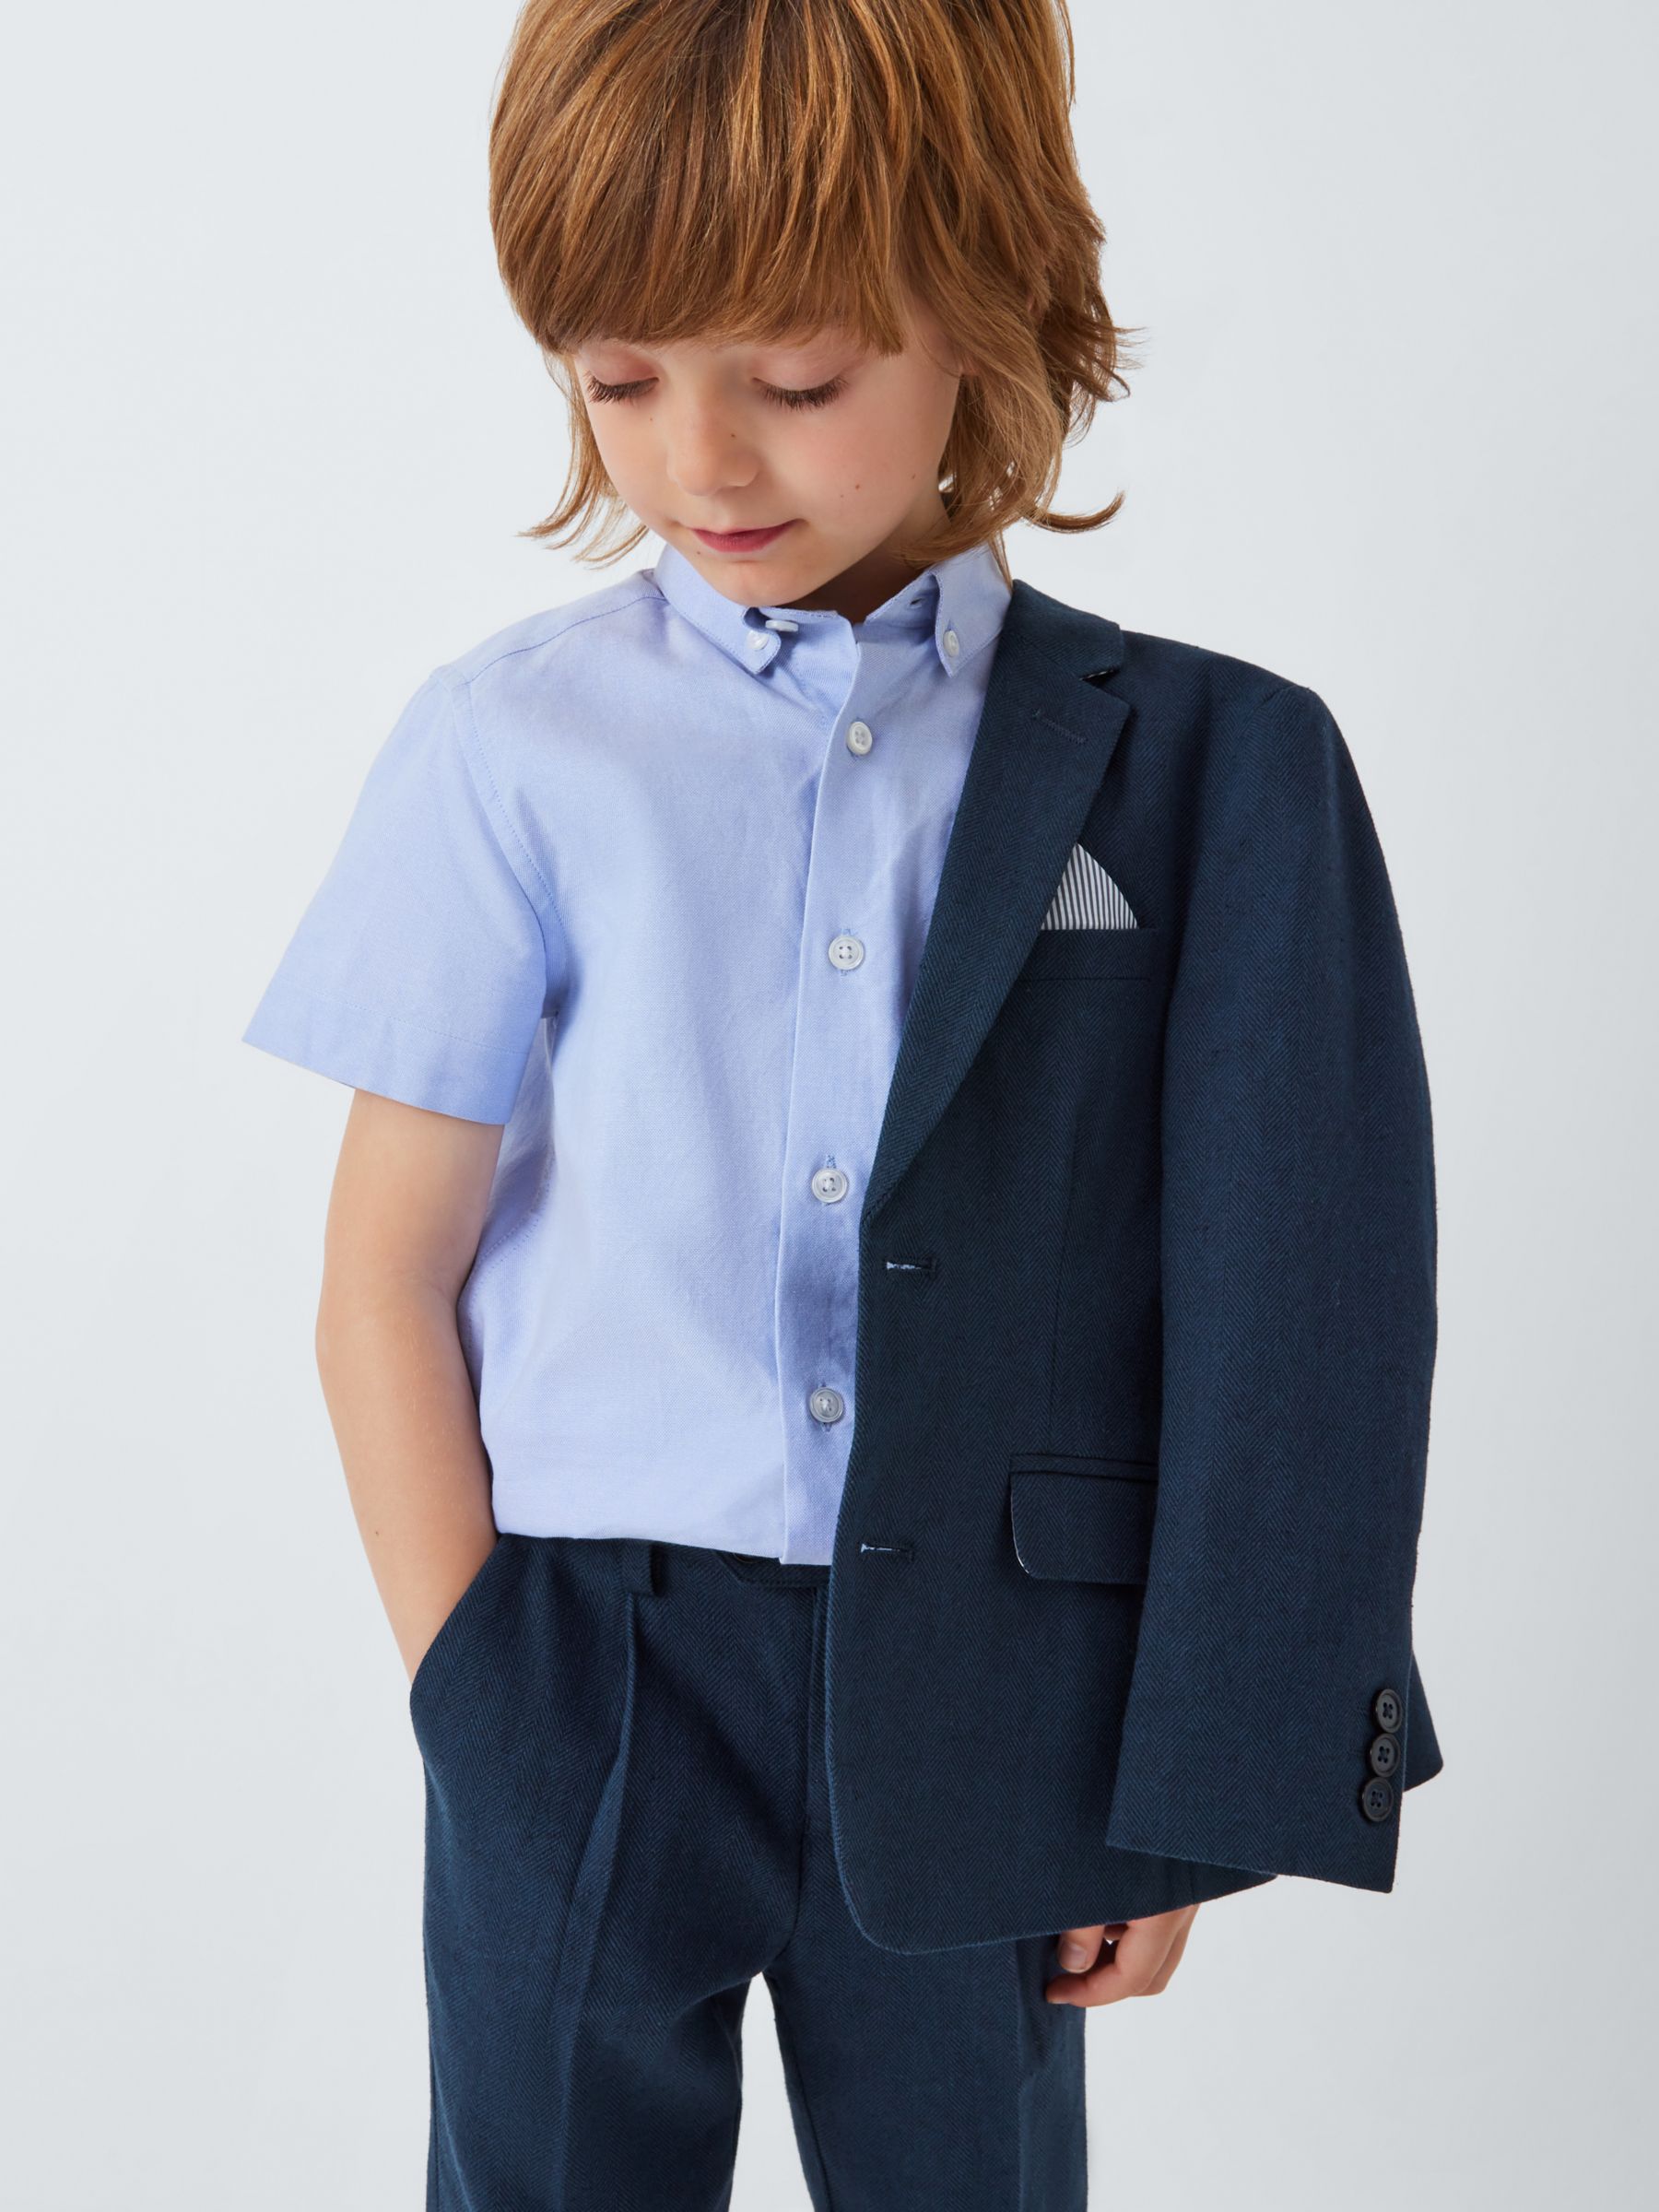 John Lewis Heirloom Collection Kids' Linen Blend Suit Trousers, Navy, 2 years